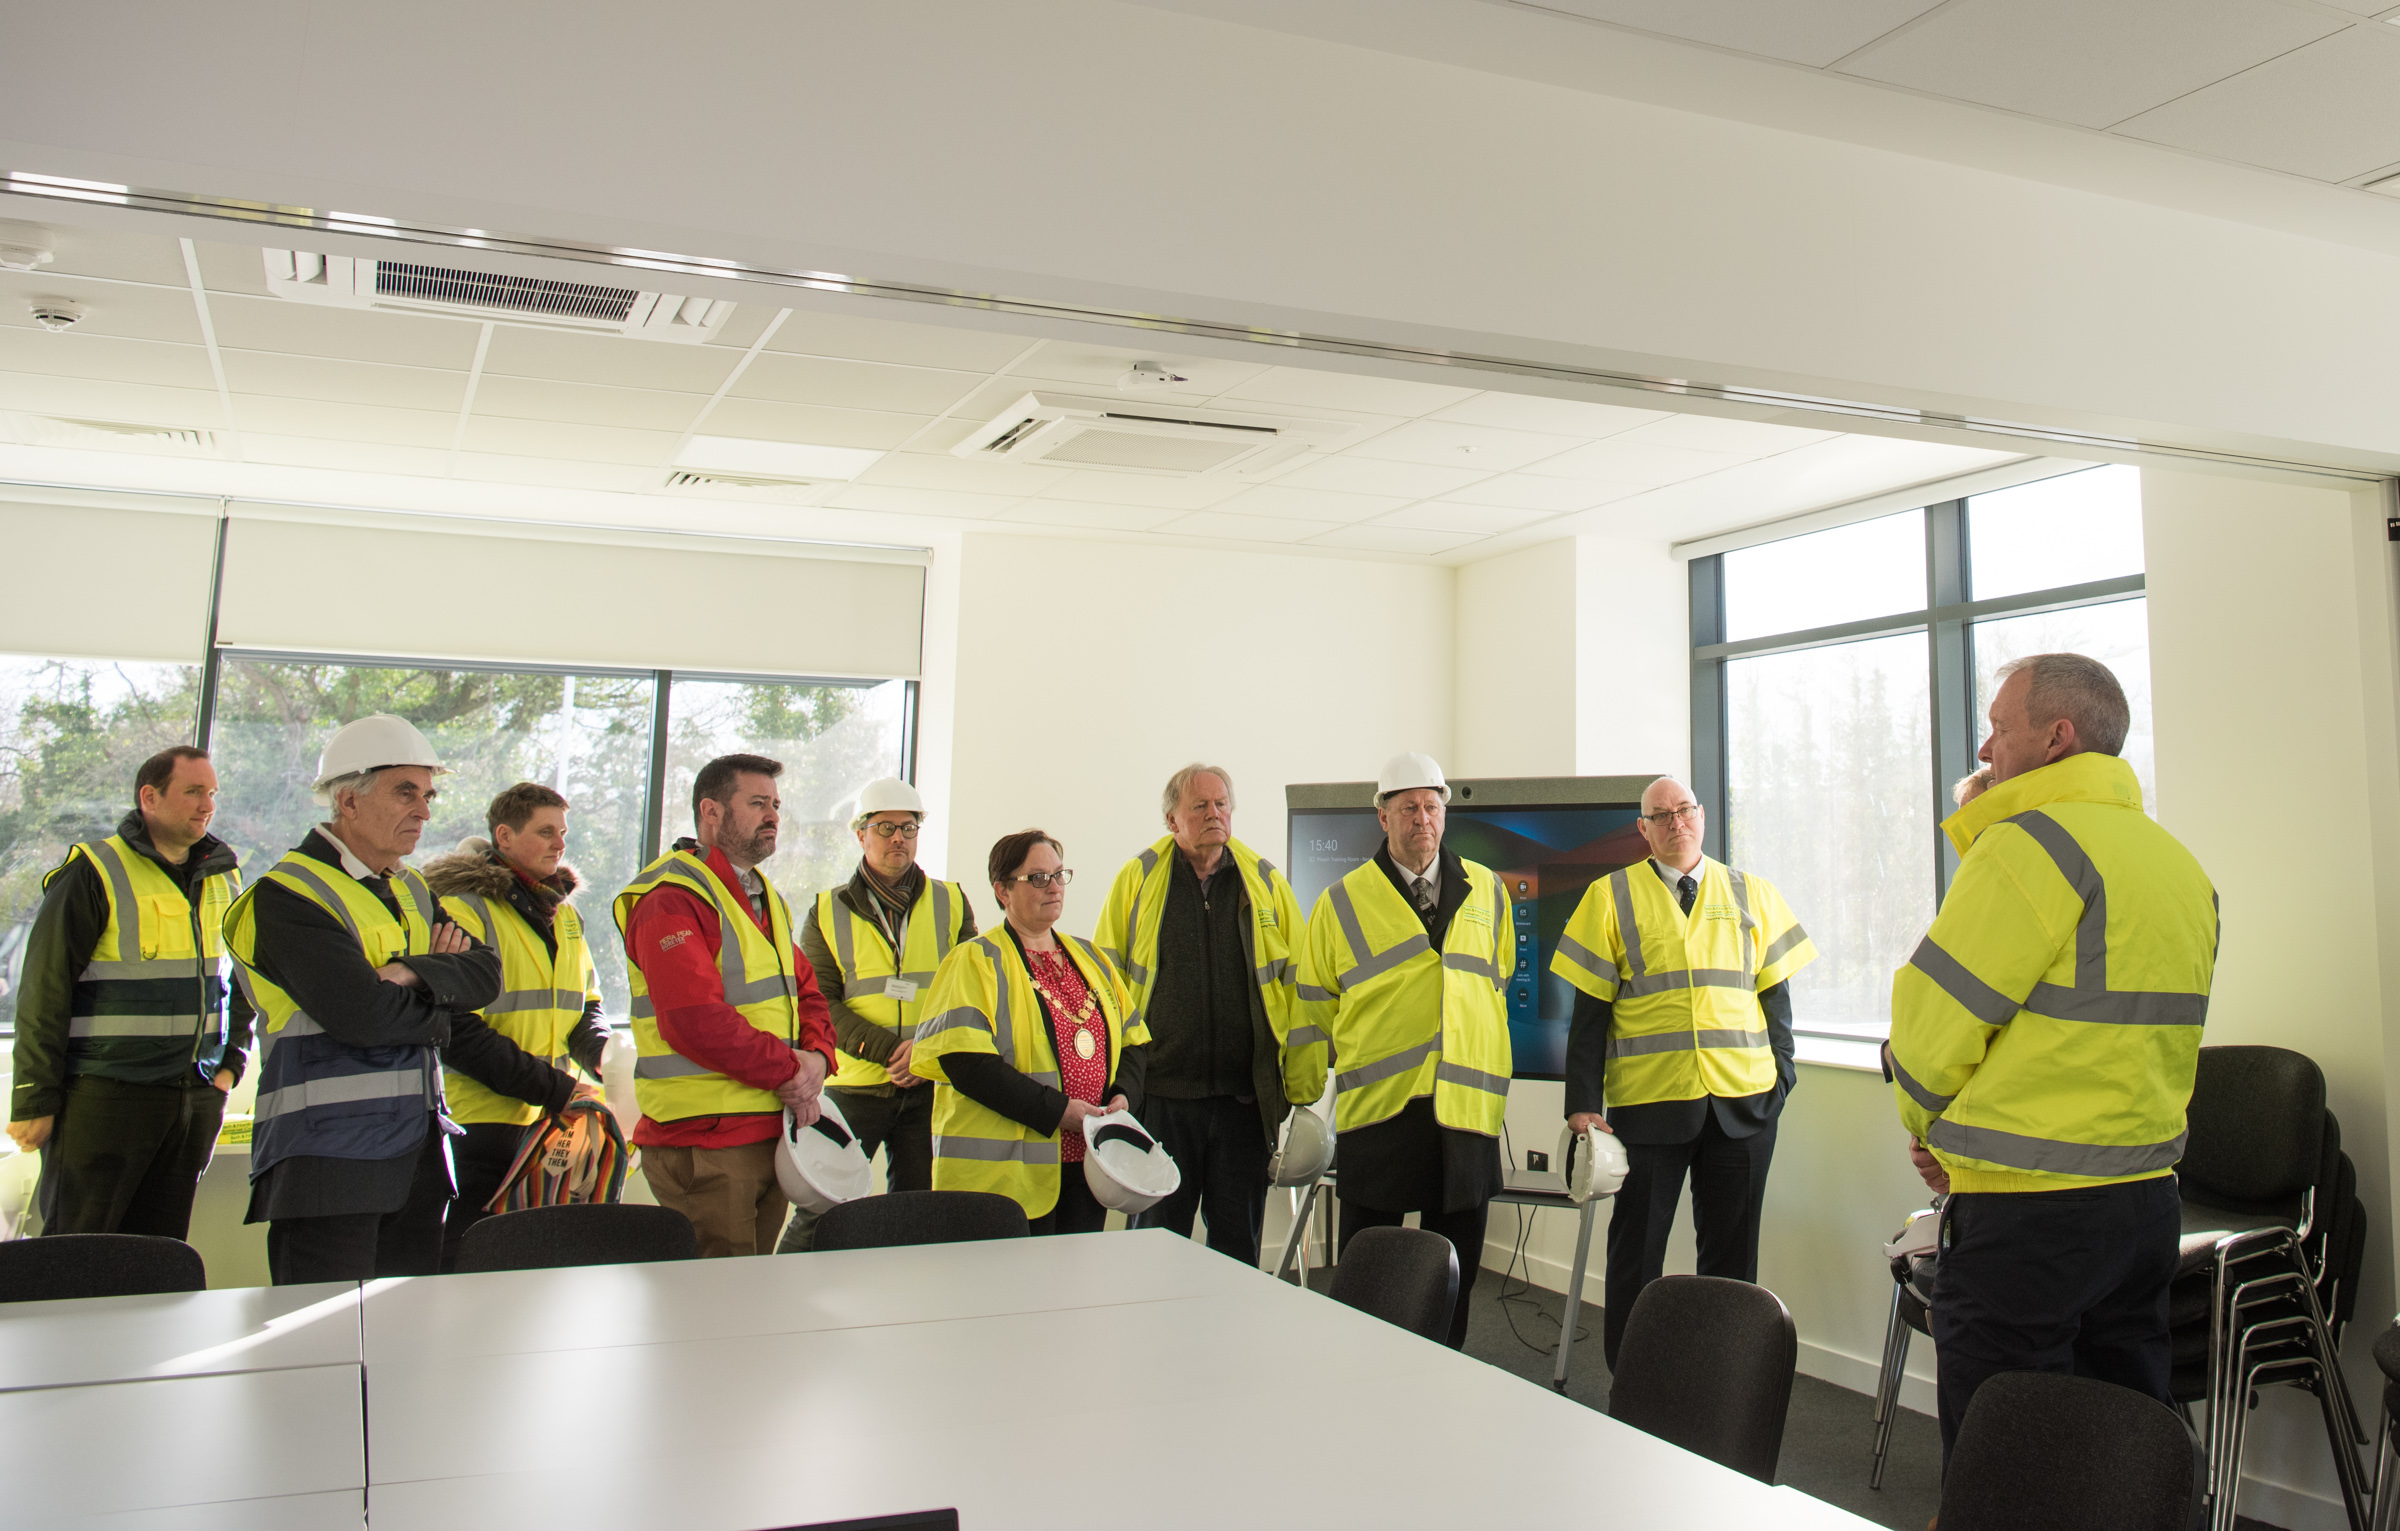 A picture of Councillors and Council staff in high-vis uniforms at the newly-opened Keynsham Recycling Hub